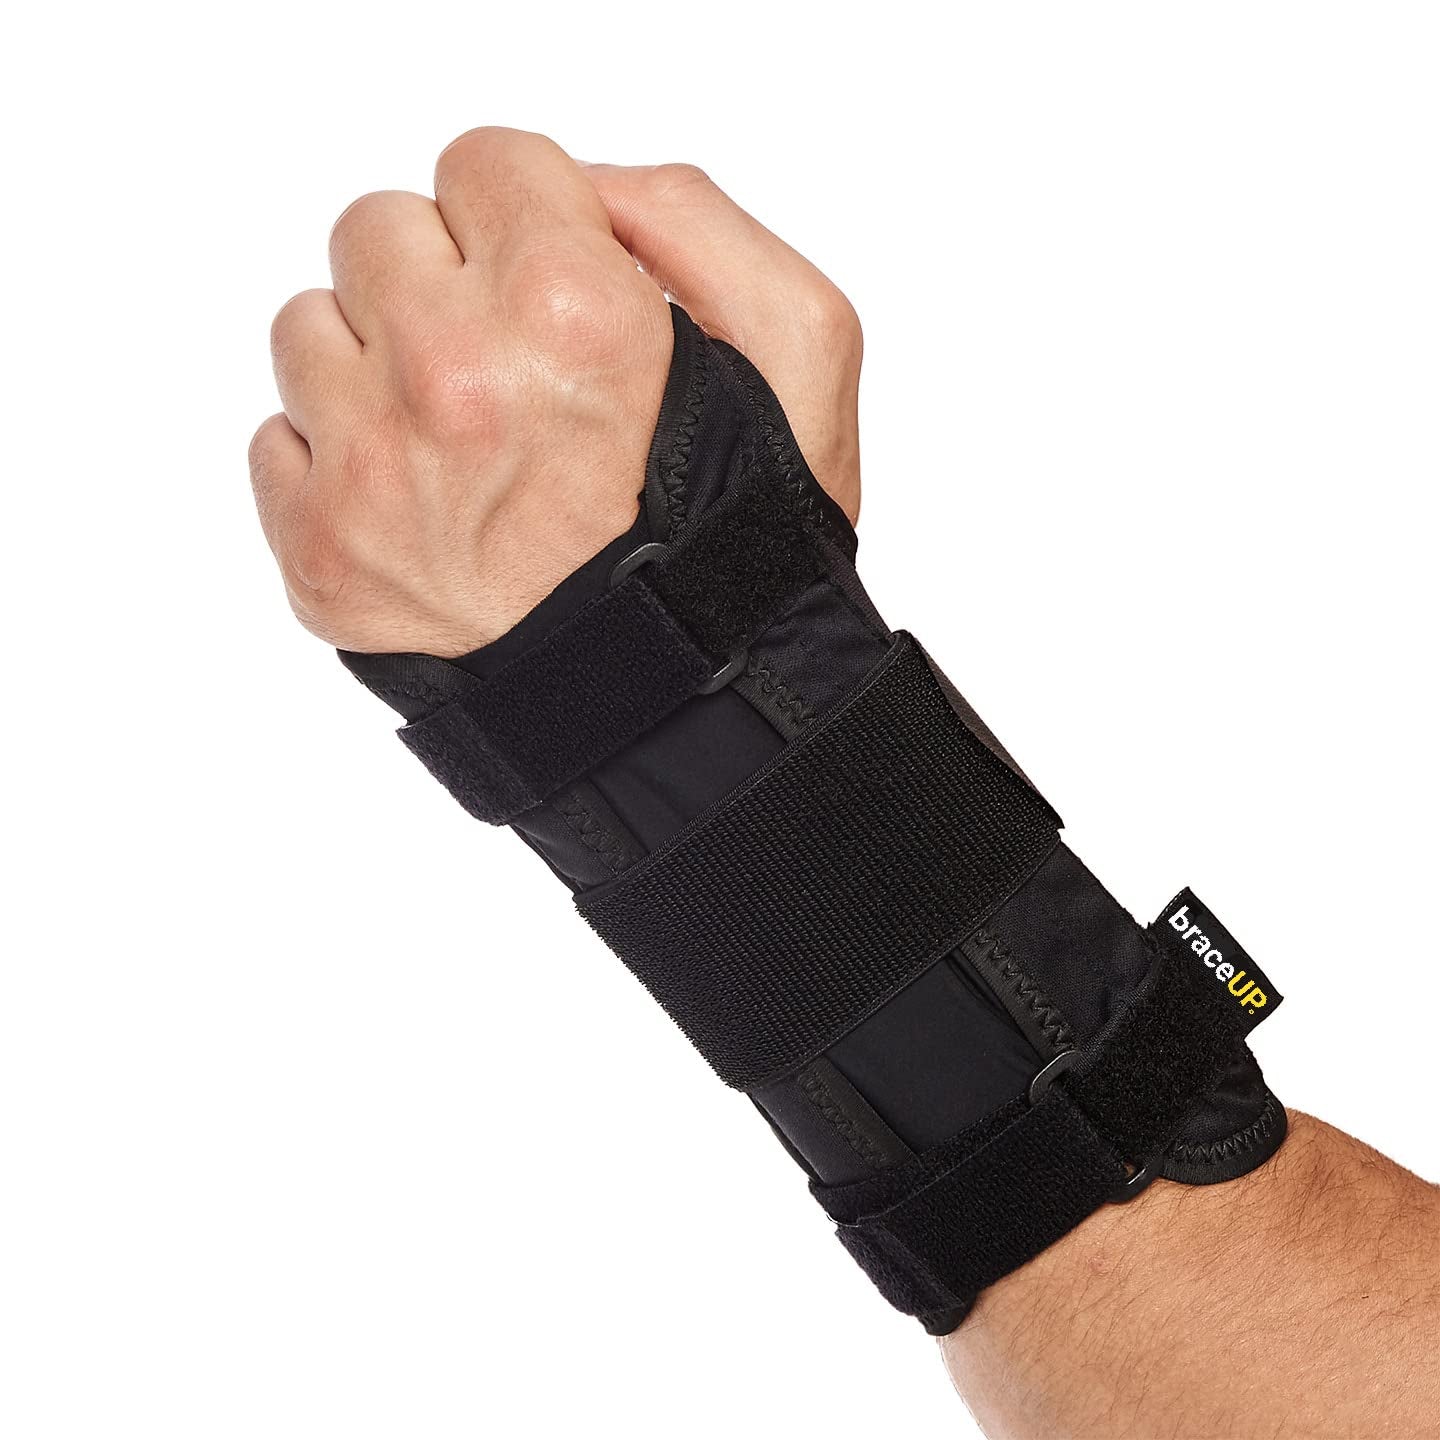 Carpal Tunnel Wrist Brace by Braceup for Men and Women - Metal Wrist Splint for Hand and Wrist Support and Tendonitis Arthritis Pain Relief